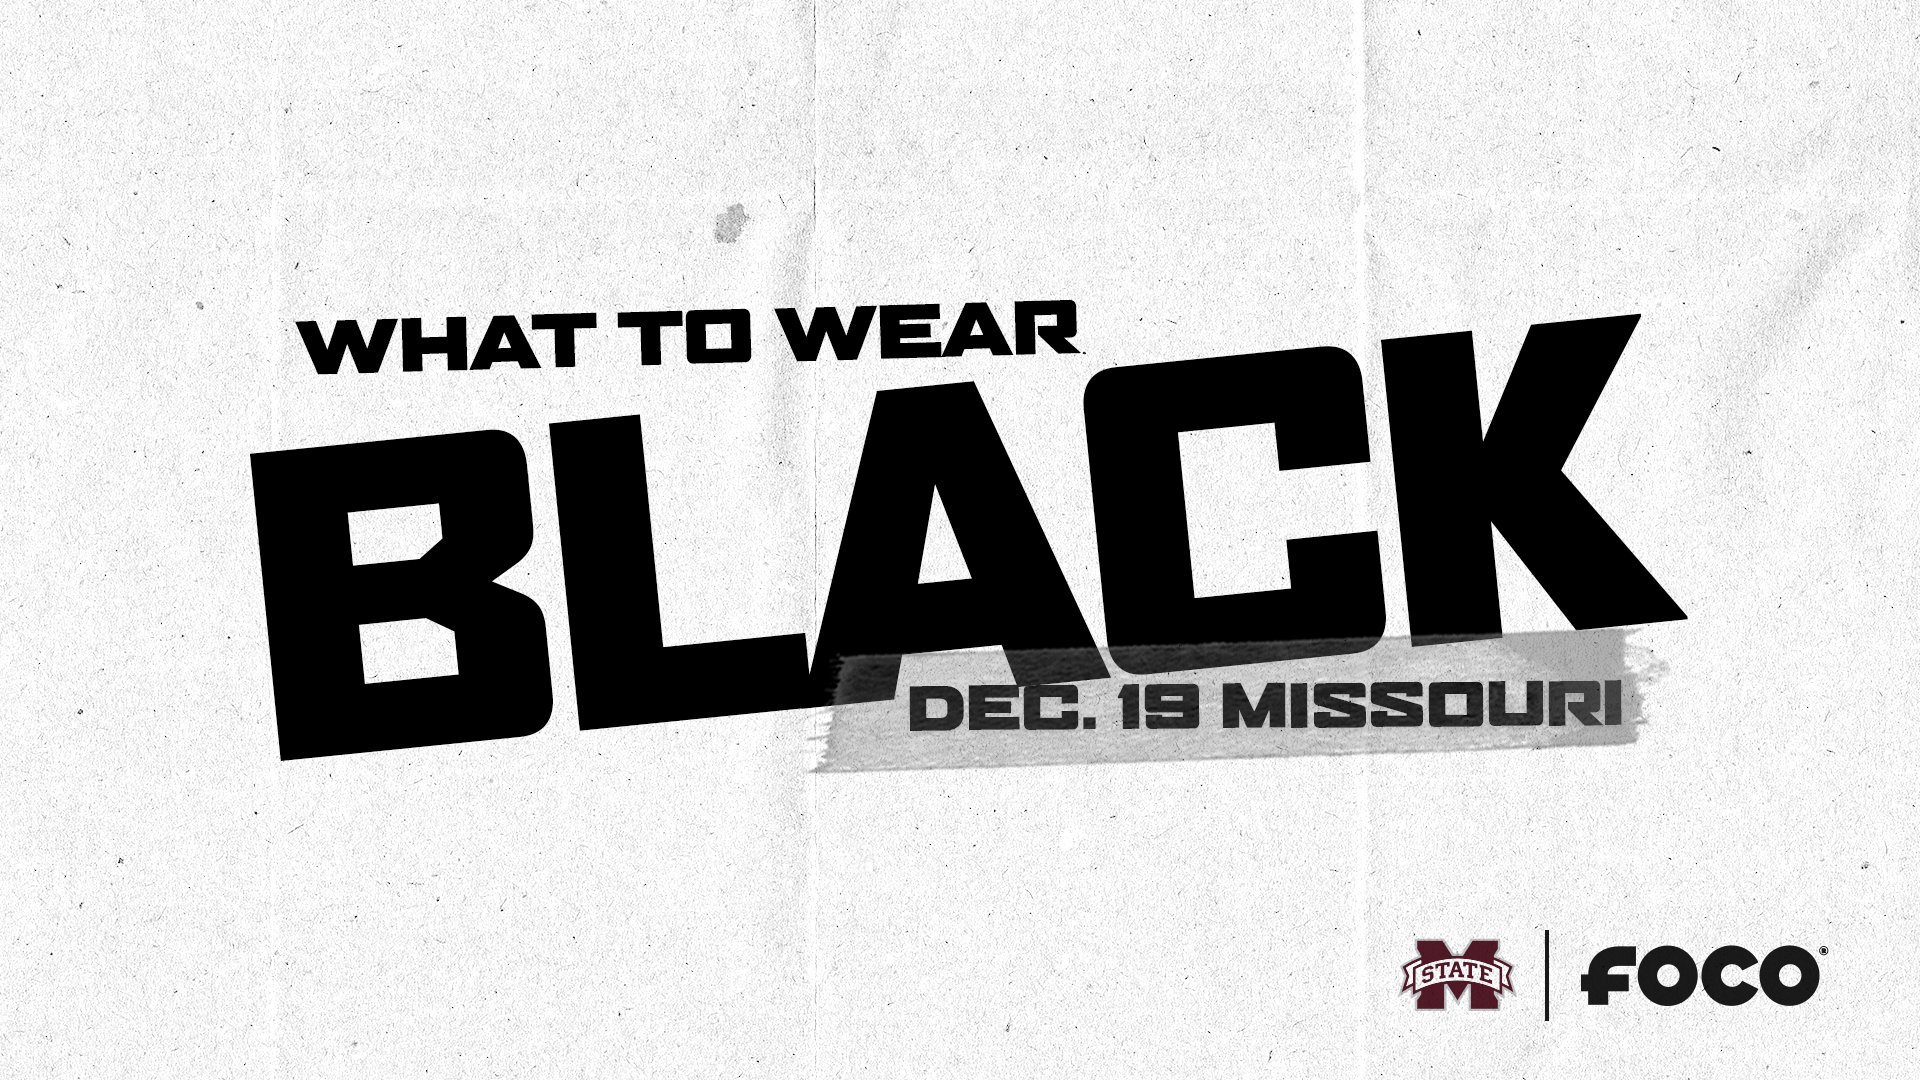 White graphic with black lettering reminding fans to wear black to Mississippi State's football game versus Missouri